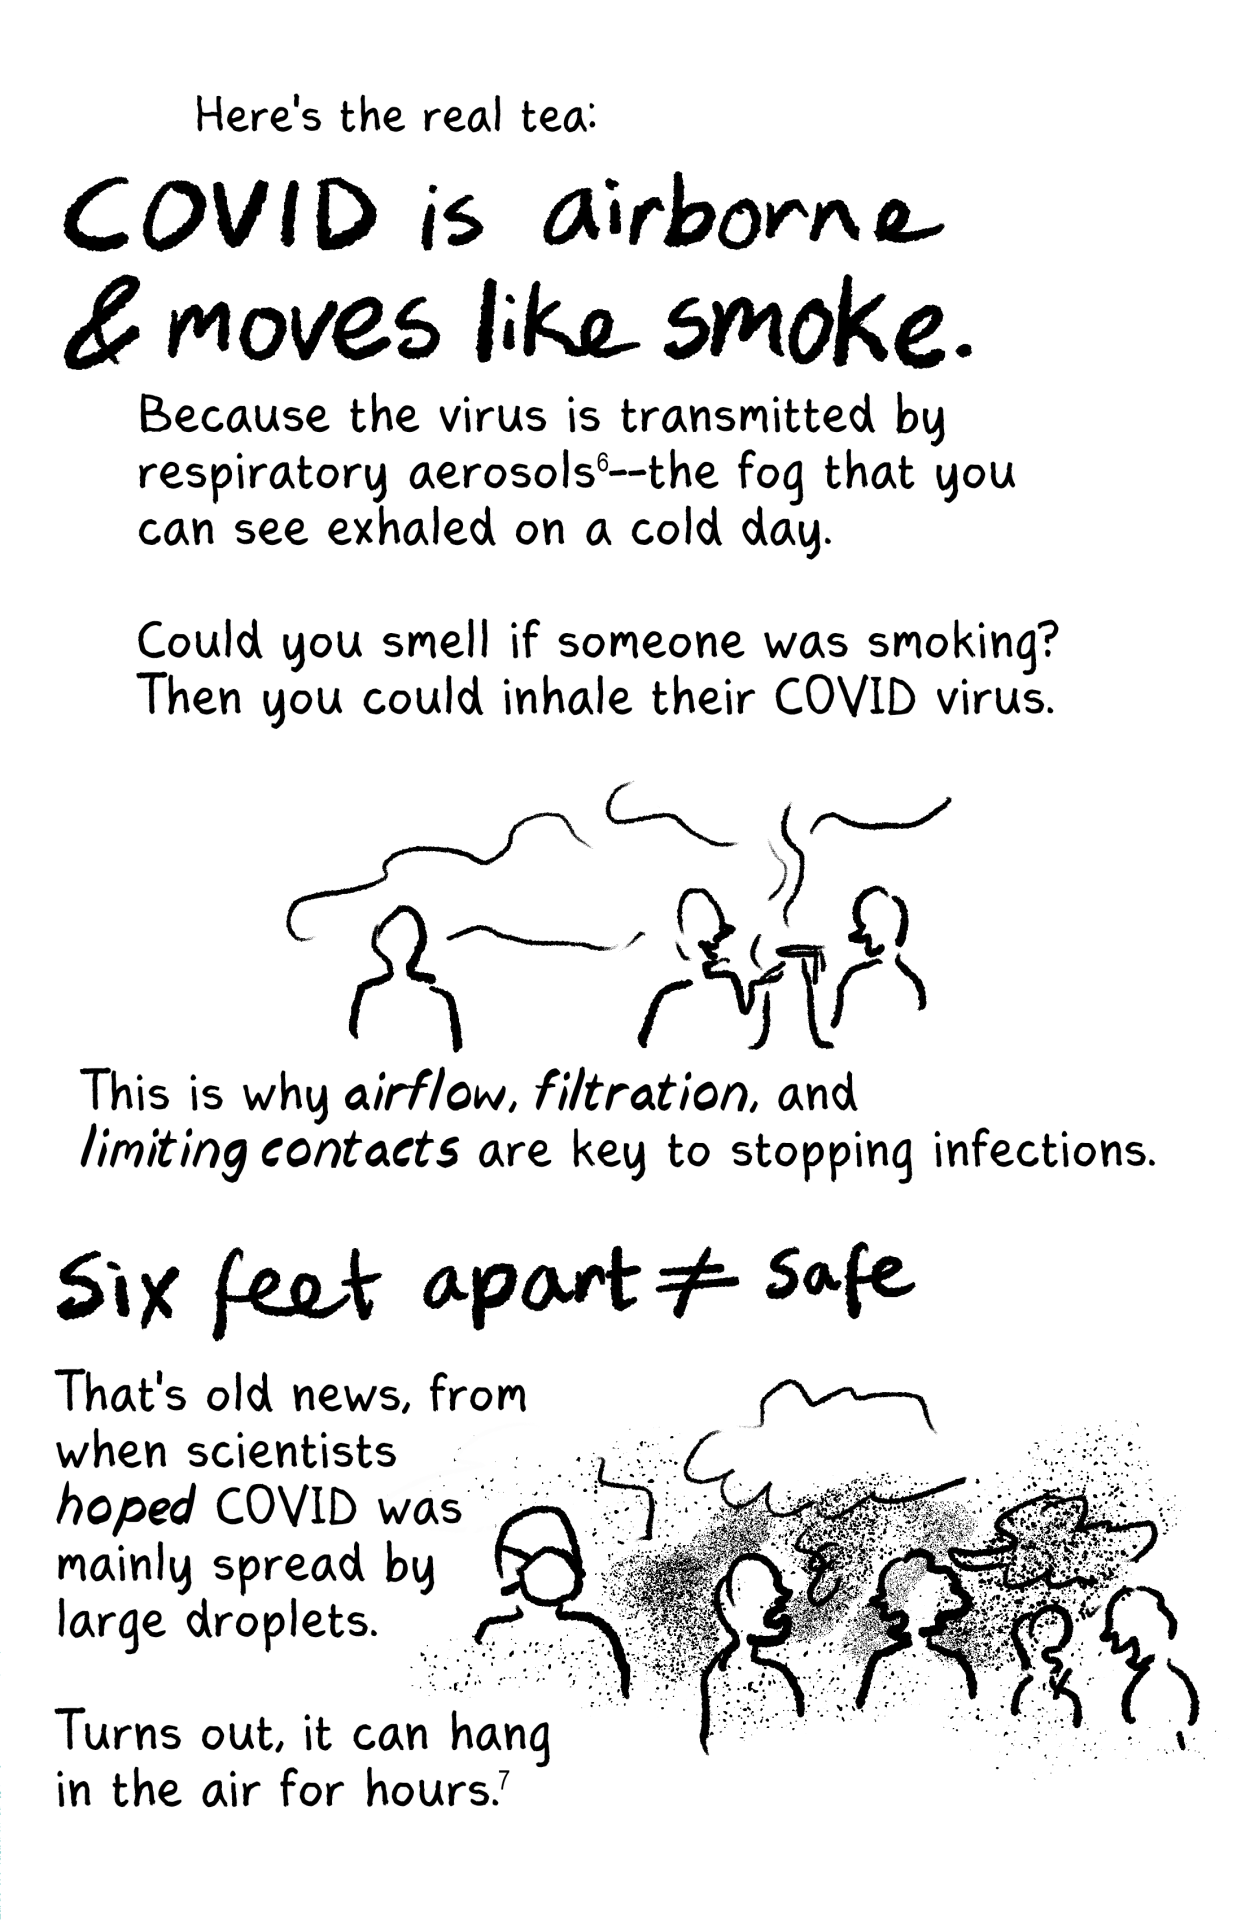 COVID zine p2  Here's the real tea: [handwritten, bold text] COVID is airborne & movies like smoke. Because the virus is transmitted by respiratory aerosols--the fog that you can see exhaled on a cold day.  Could you smell if someone was smoking? Then you could inhale their COVID virus. [Cartoon of a person standing near 2 cigarette smokers, surrounded by smoke.] This is why airflow, filtration, and limiting contacts are key to stopping infections. [handwritten, bold text] Six feet apart /= safe That's old news, from when scientists *hoped* COVID was mainly spread by large droplets.  Turns out, it can hang out in the air for hours.